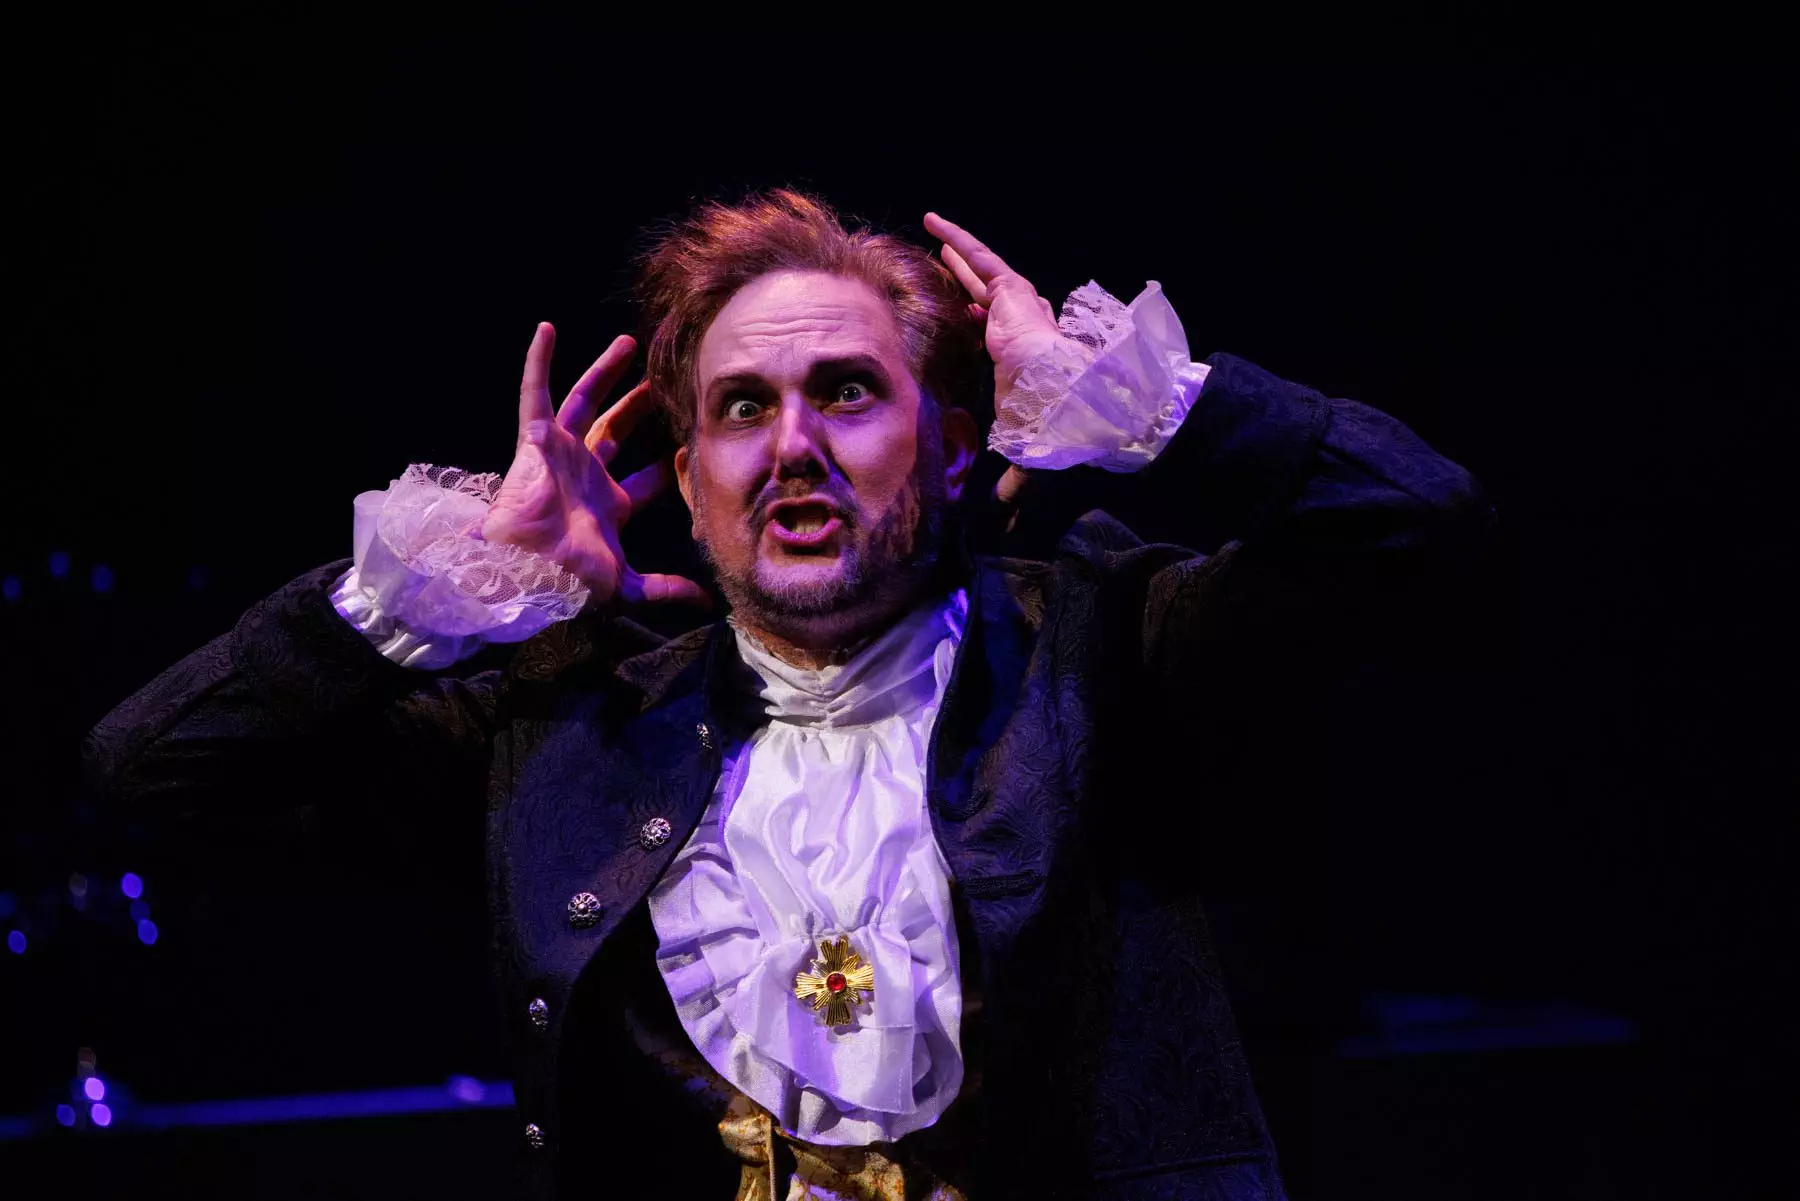 Kyle Hancock, as Sir Roderic Murgatroyd, performs "When the night wind howls" from Gilbert & Sullivan's "Ruddigore". He wears a frilled shirt and a dark jacket, and holds up his hands to his head with a crazed expression.